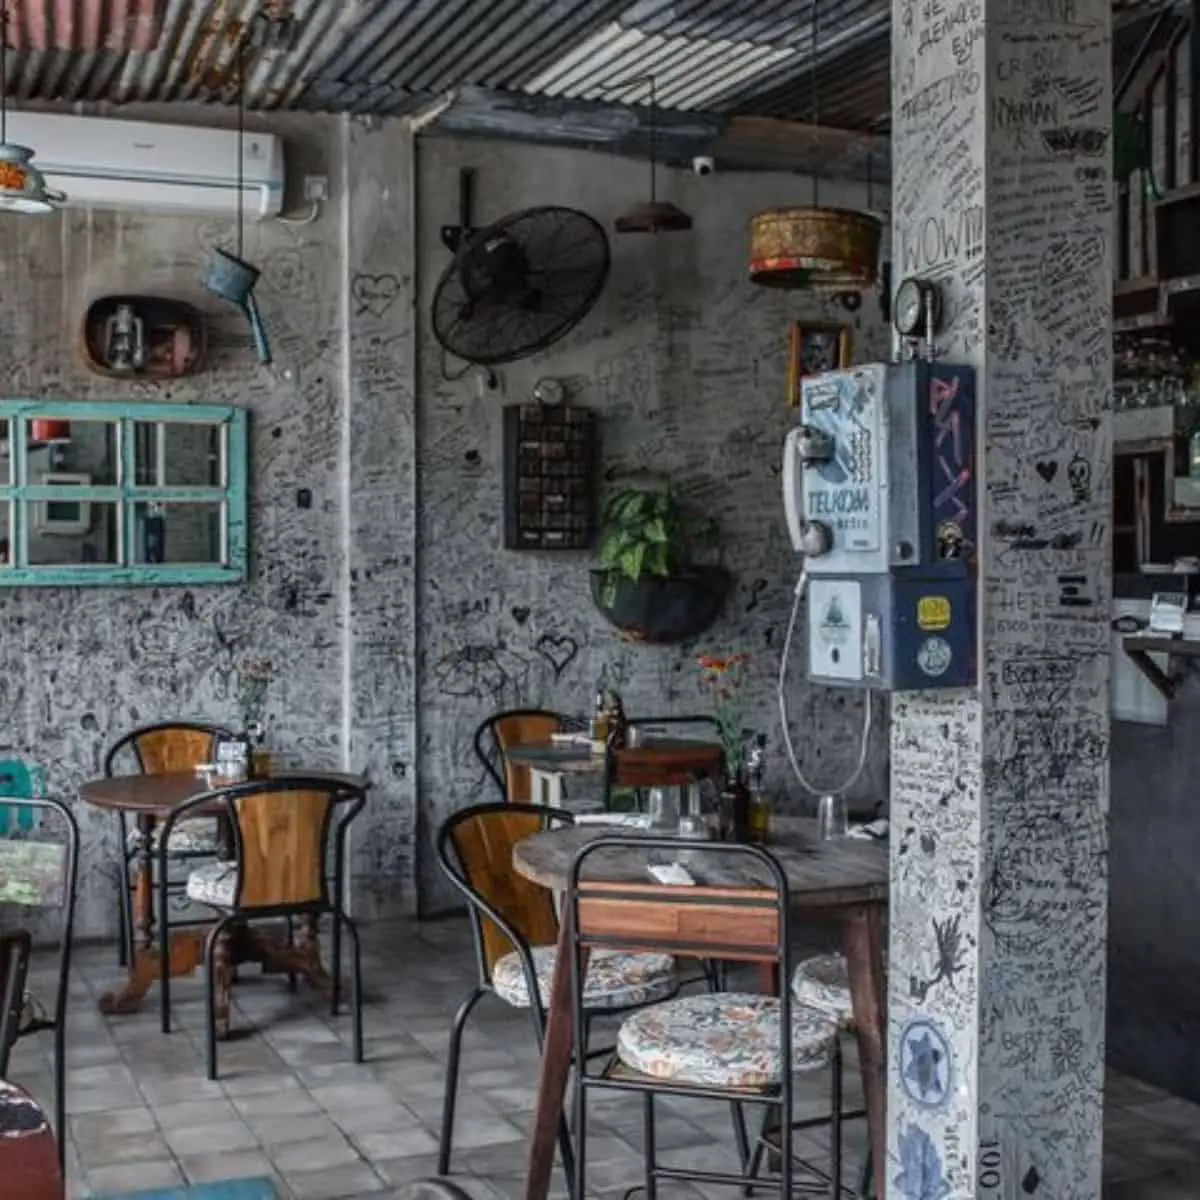 A snapshot of an empty place of La Baracca’s vintage type of resto using recycled materials